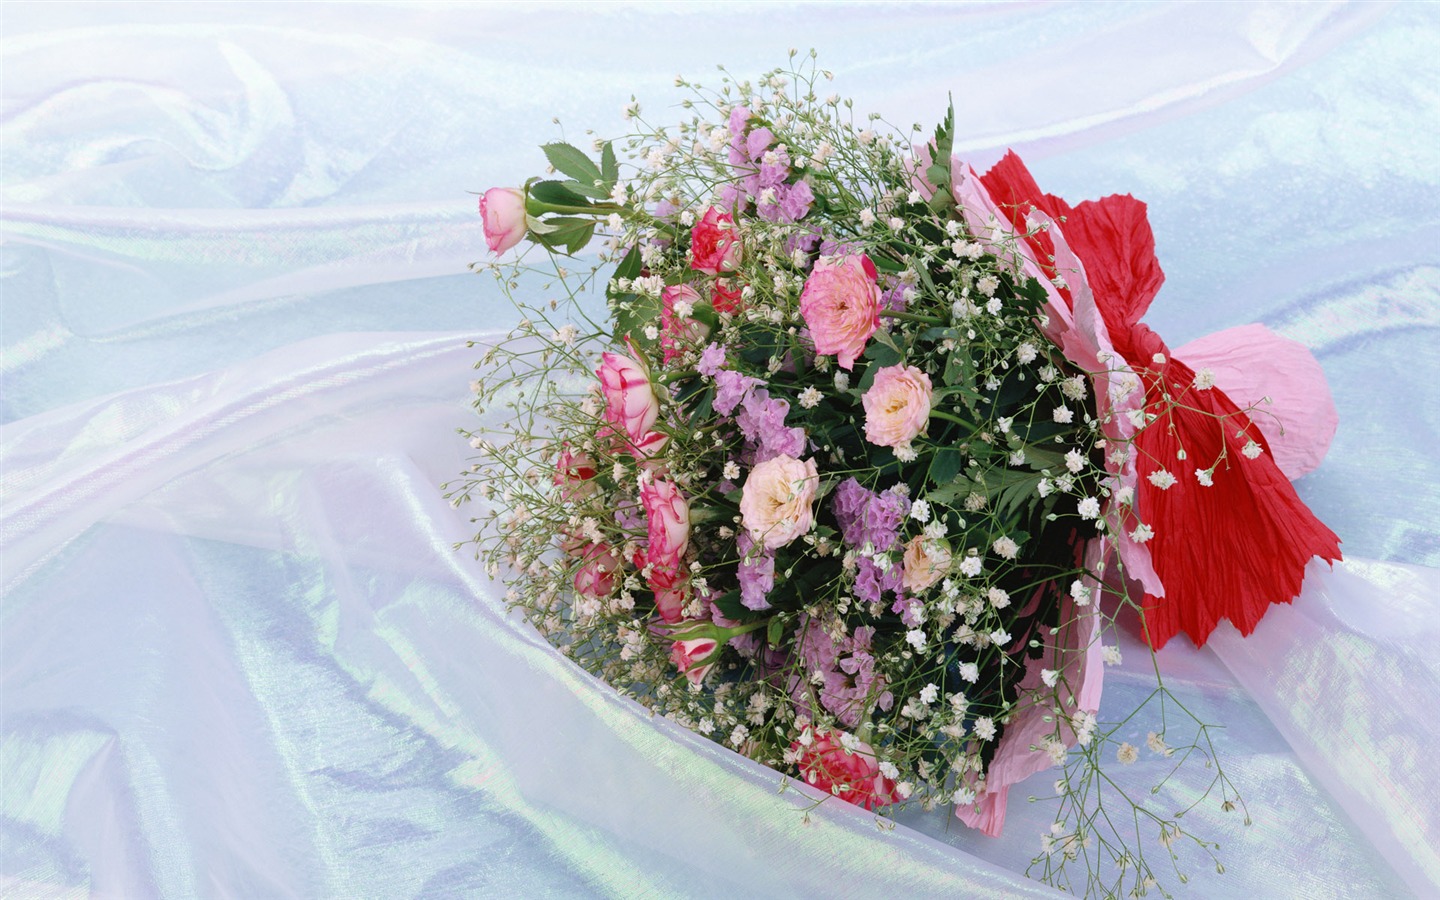 Weddings and Flowers wallpaper (2) #14 - 1440x900